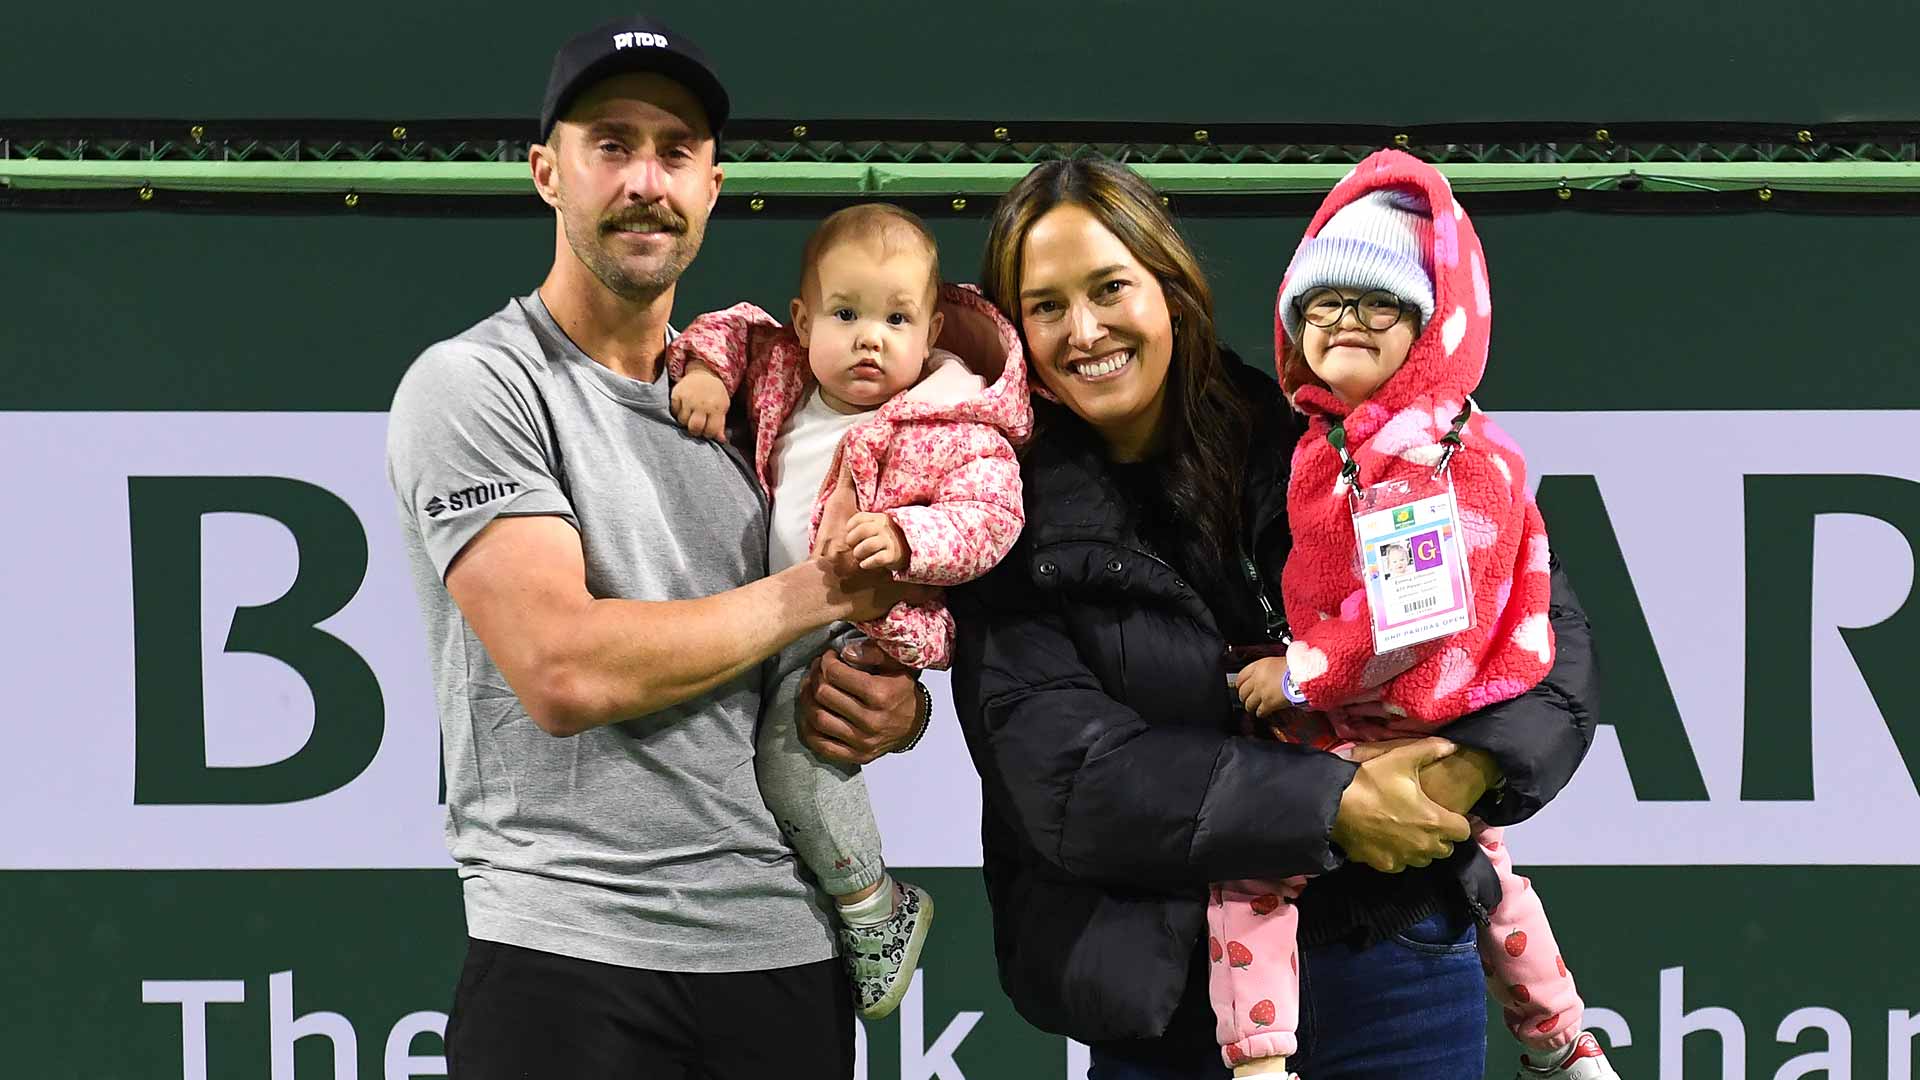 Steve Johnson poses for a photo with his wife Kendall and daughters, Molly and Emma, after his final singles match.